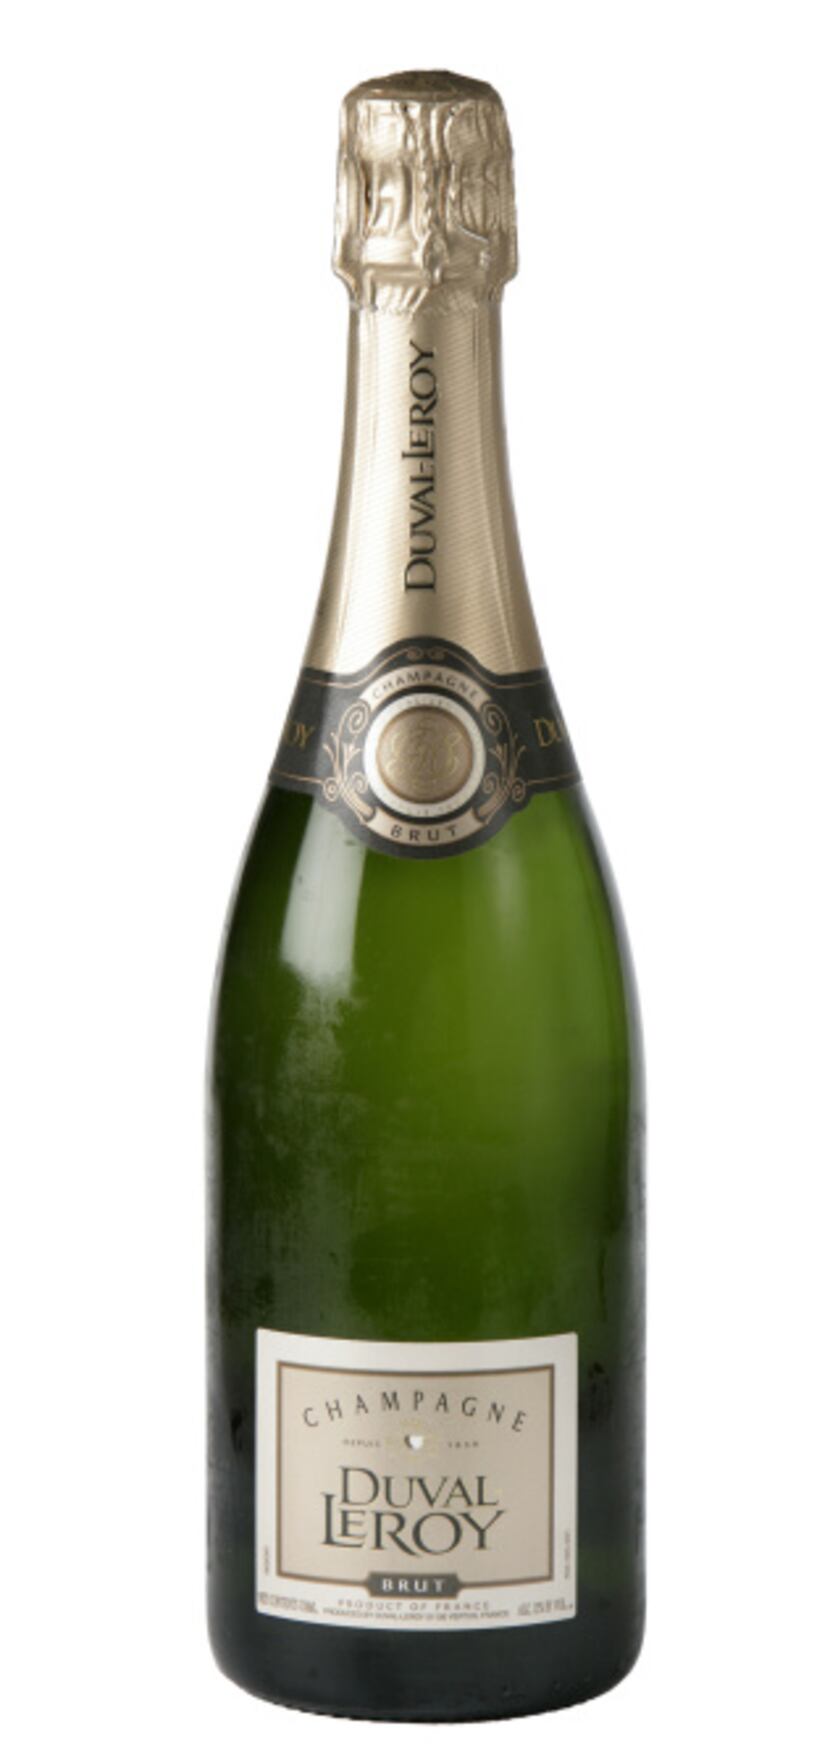 Duval-Leroy Champagne Brut, NV, France. $29.99 to $35.99; Total Wine, Spec’s, select...